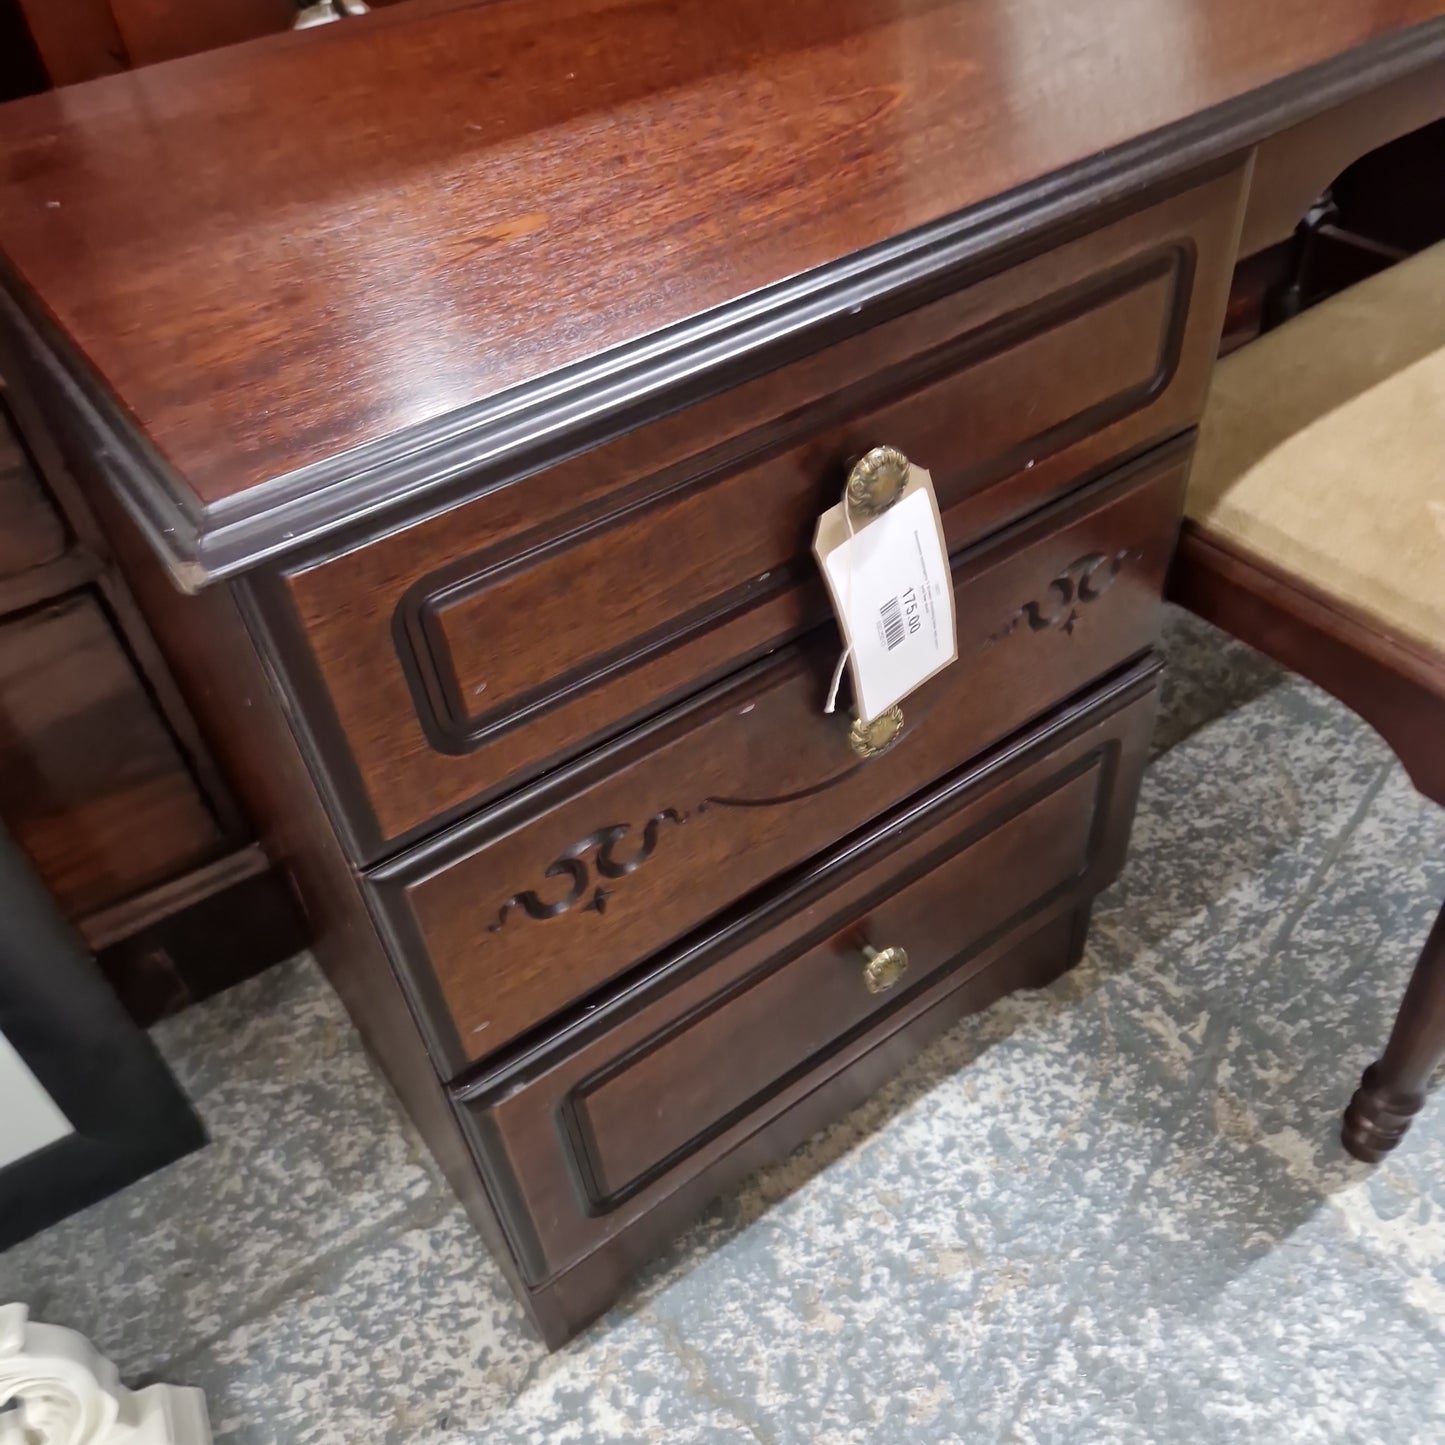 Rossmore mahogany 3 drawer dressing table with mirror and low stool